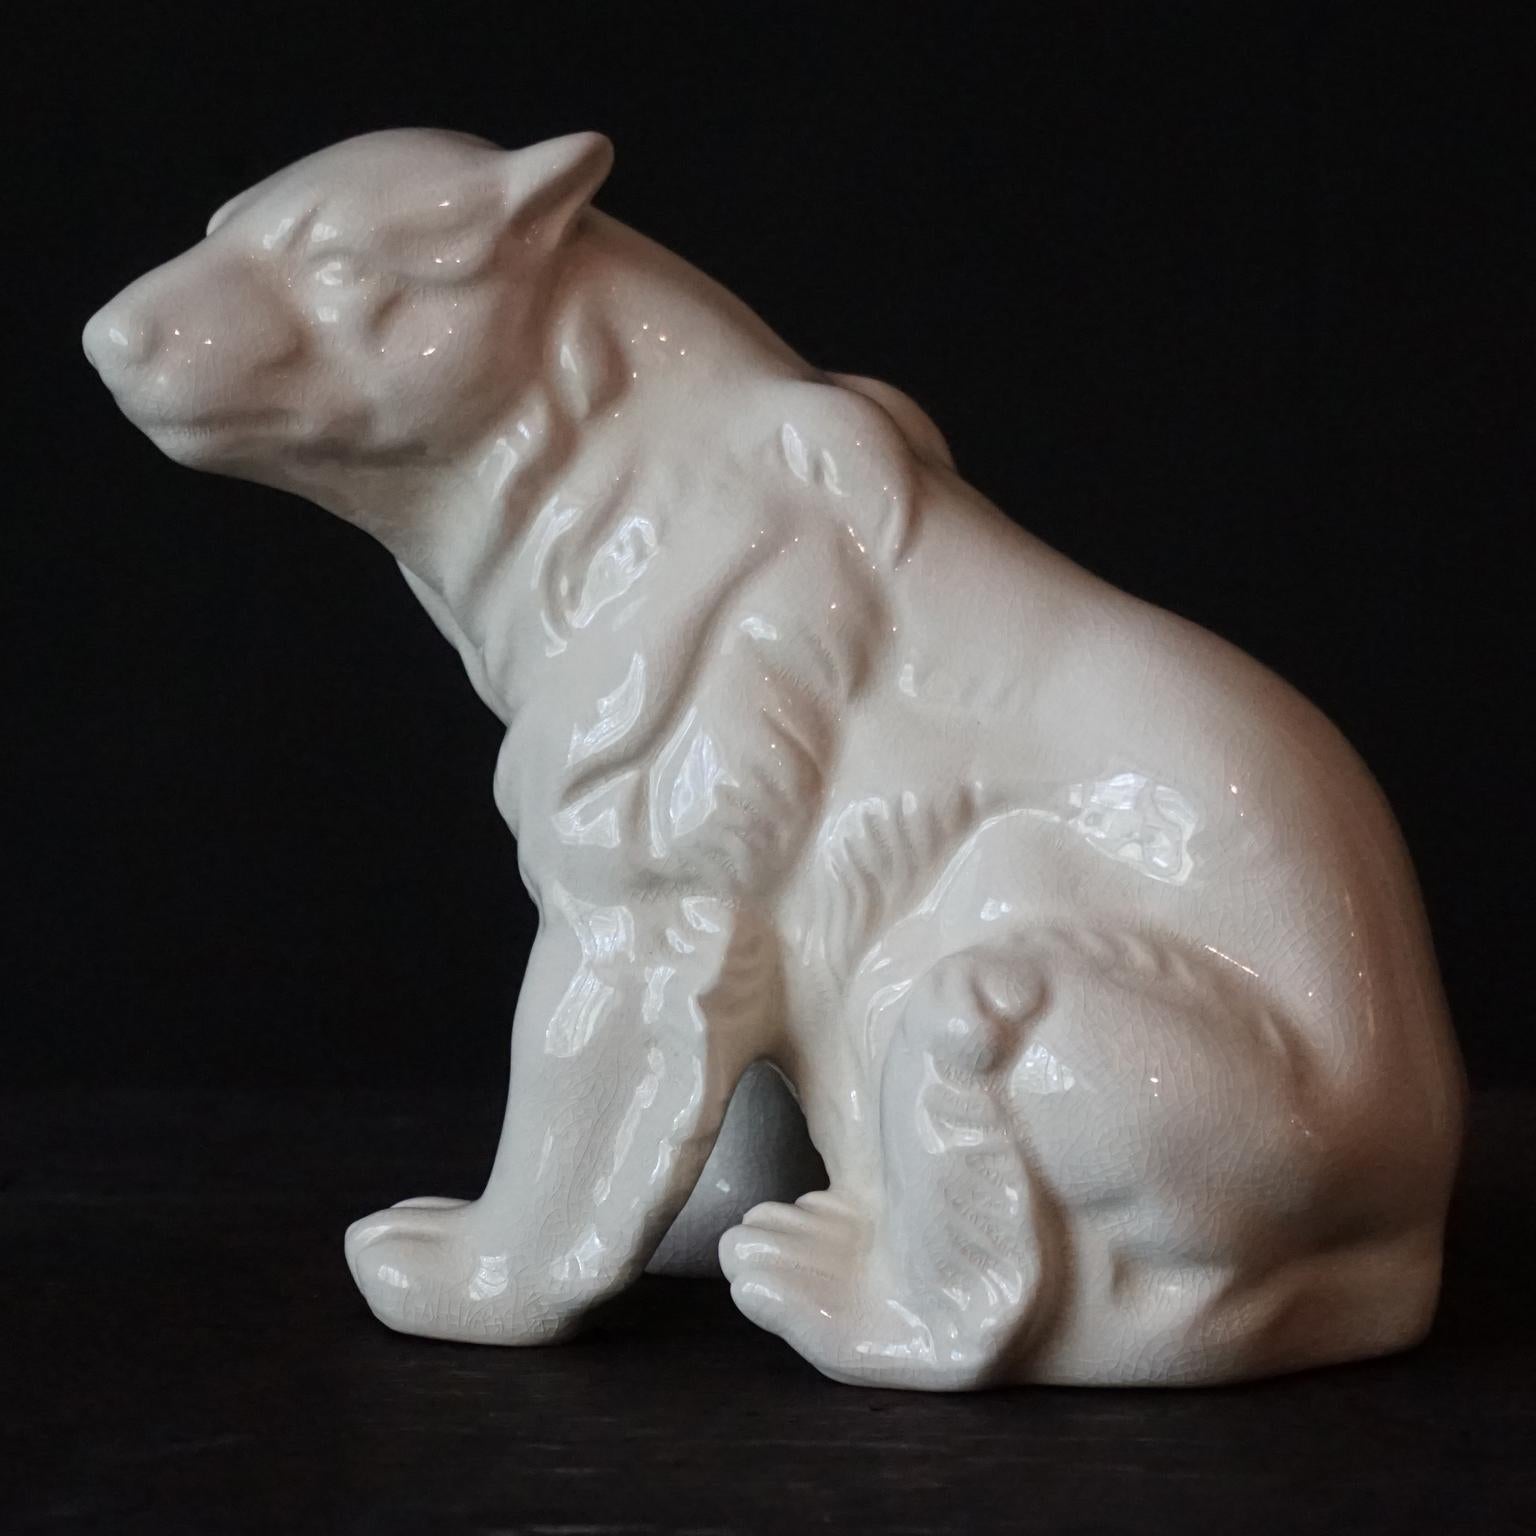 Stunning Art-Deco 1930s French sitting polar bear by L&V Ceram.
Made out of off-white ceramic covered with a shiny crackled glaze.
Stamped with the L and V Ceram logo on the bottom. 
Ceram means ceramic in French.
In mint condition.